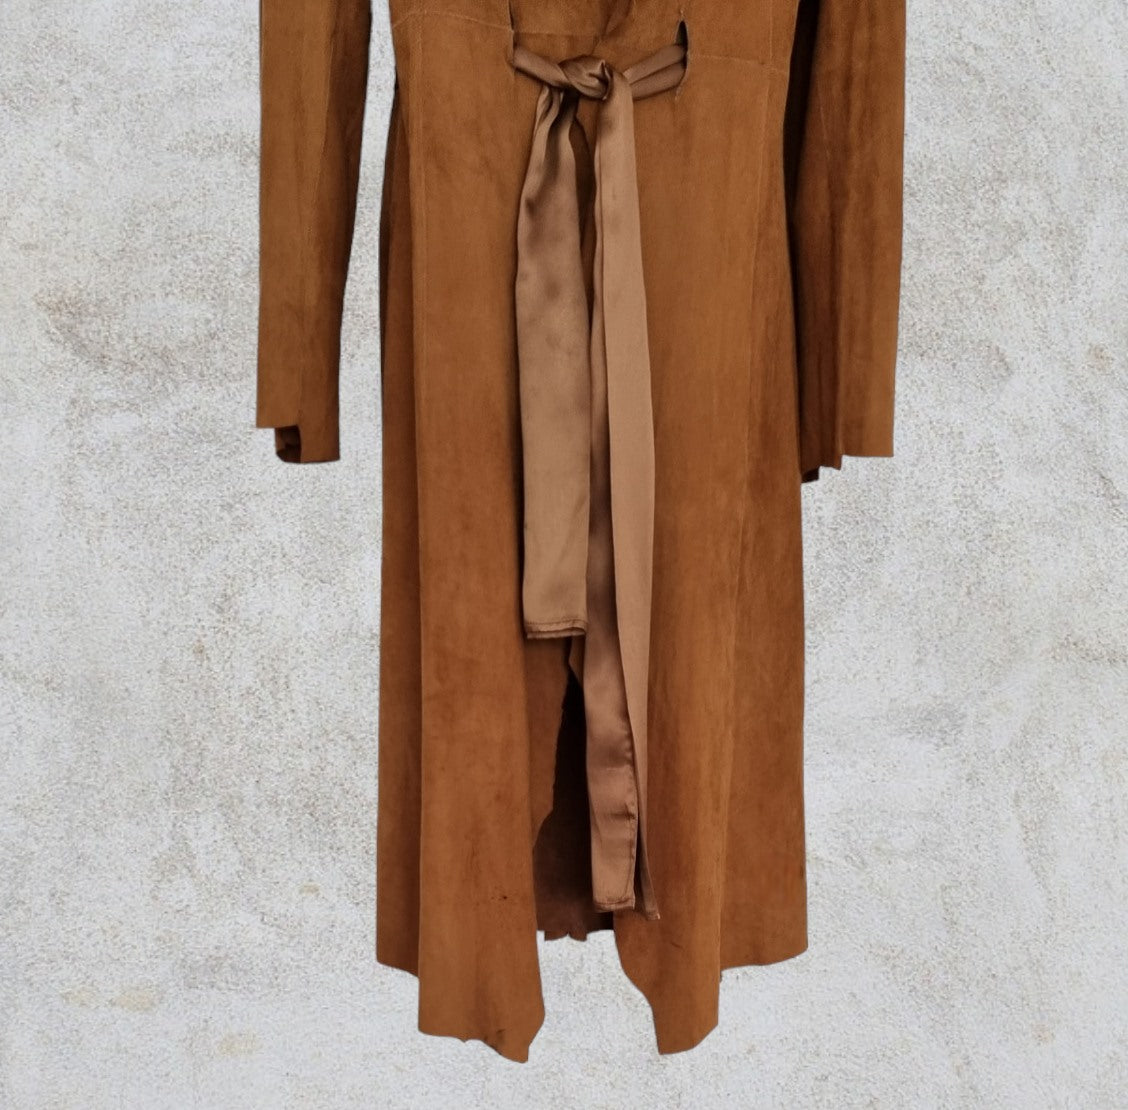 Genuine Real Leather Vintage Long Tan Suede Belted Coat. UK 16 US 12 EU 44 Timeless Fashions